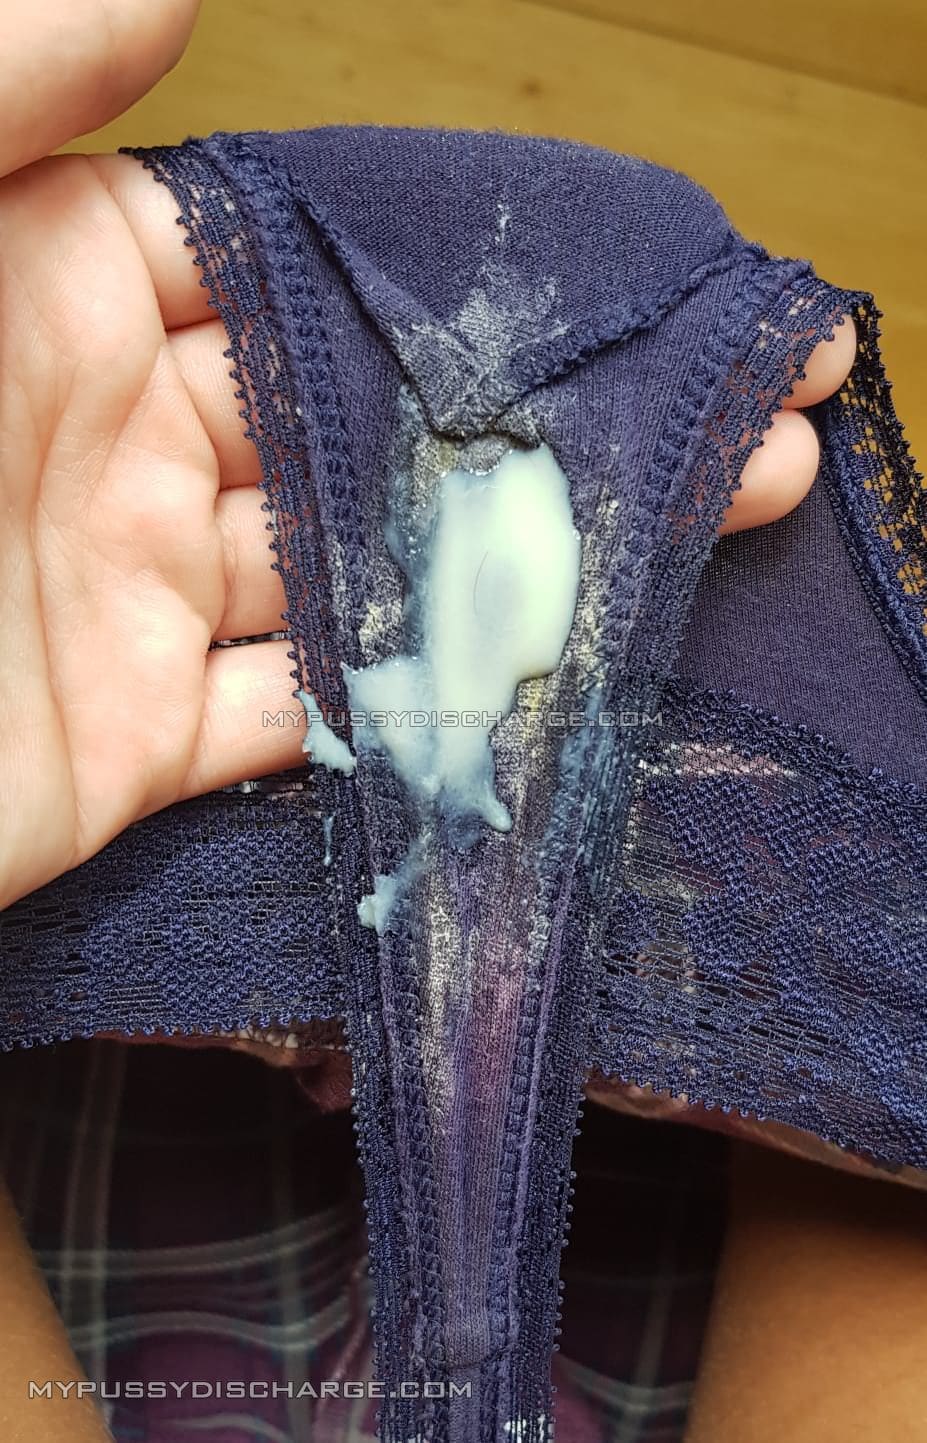 Creamy Grool And Pussy Juice On Used Thong My Pussy Dischar